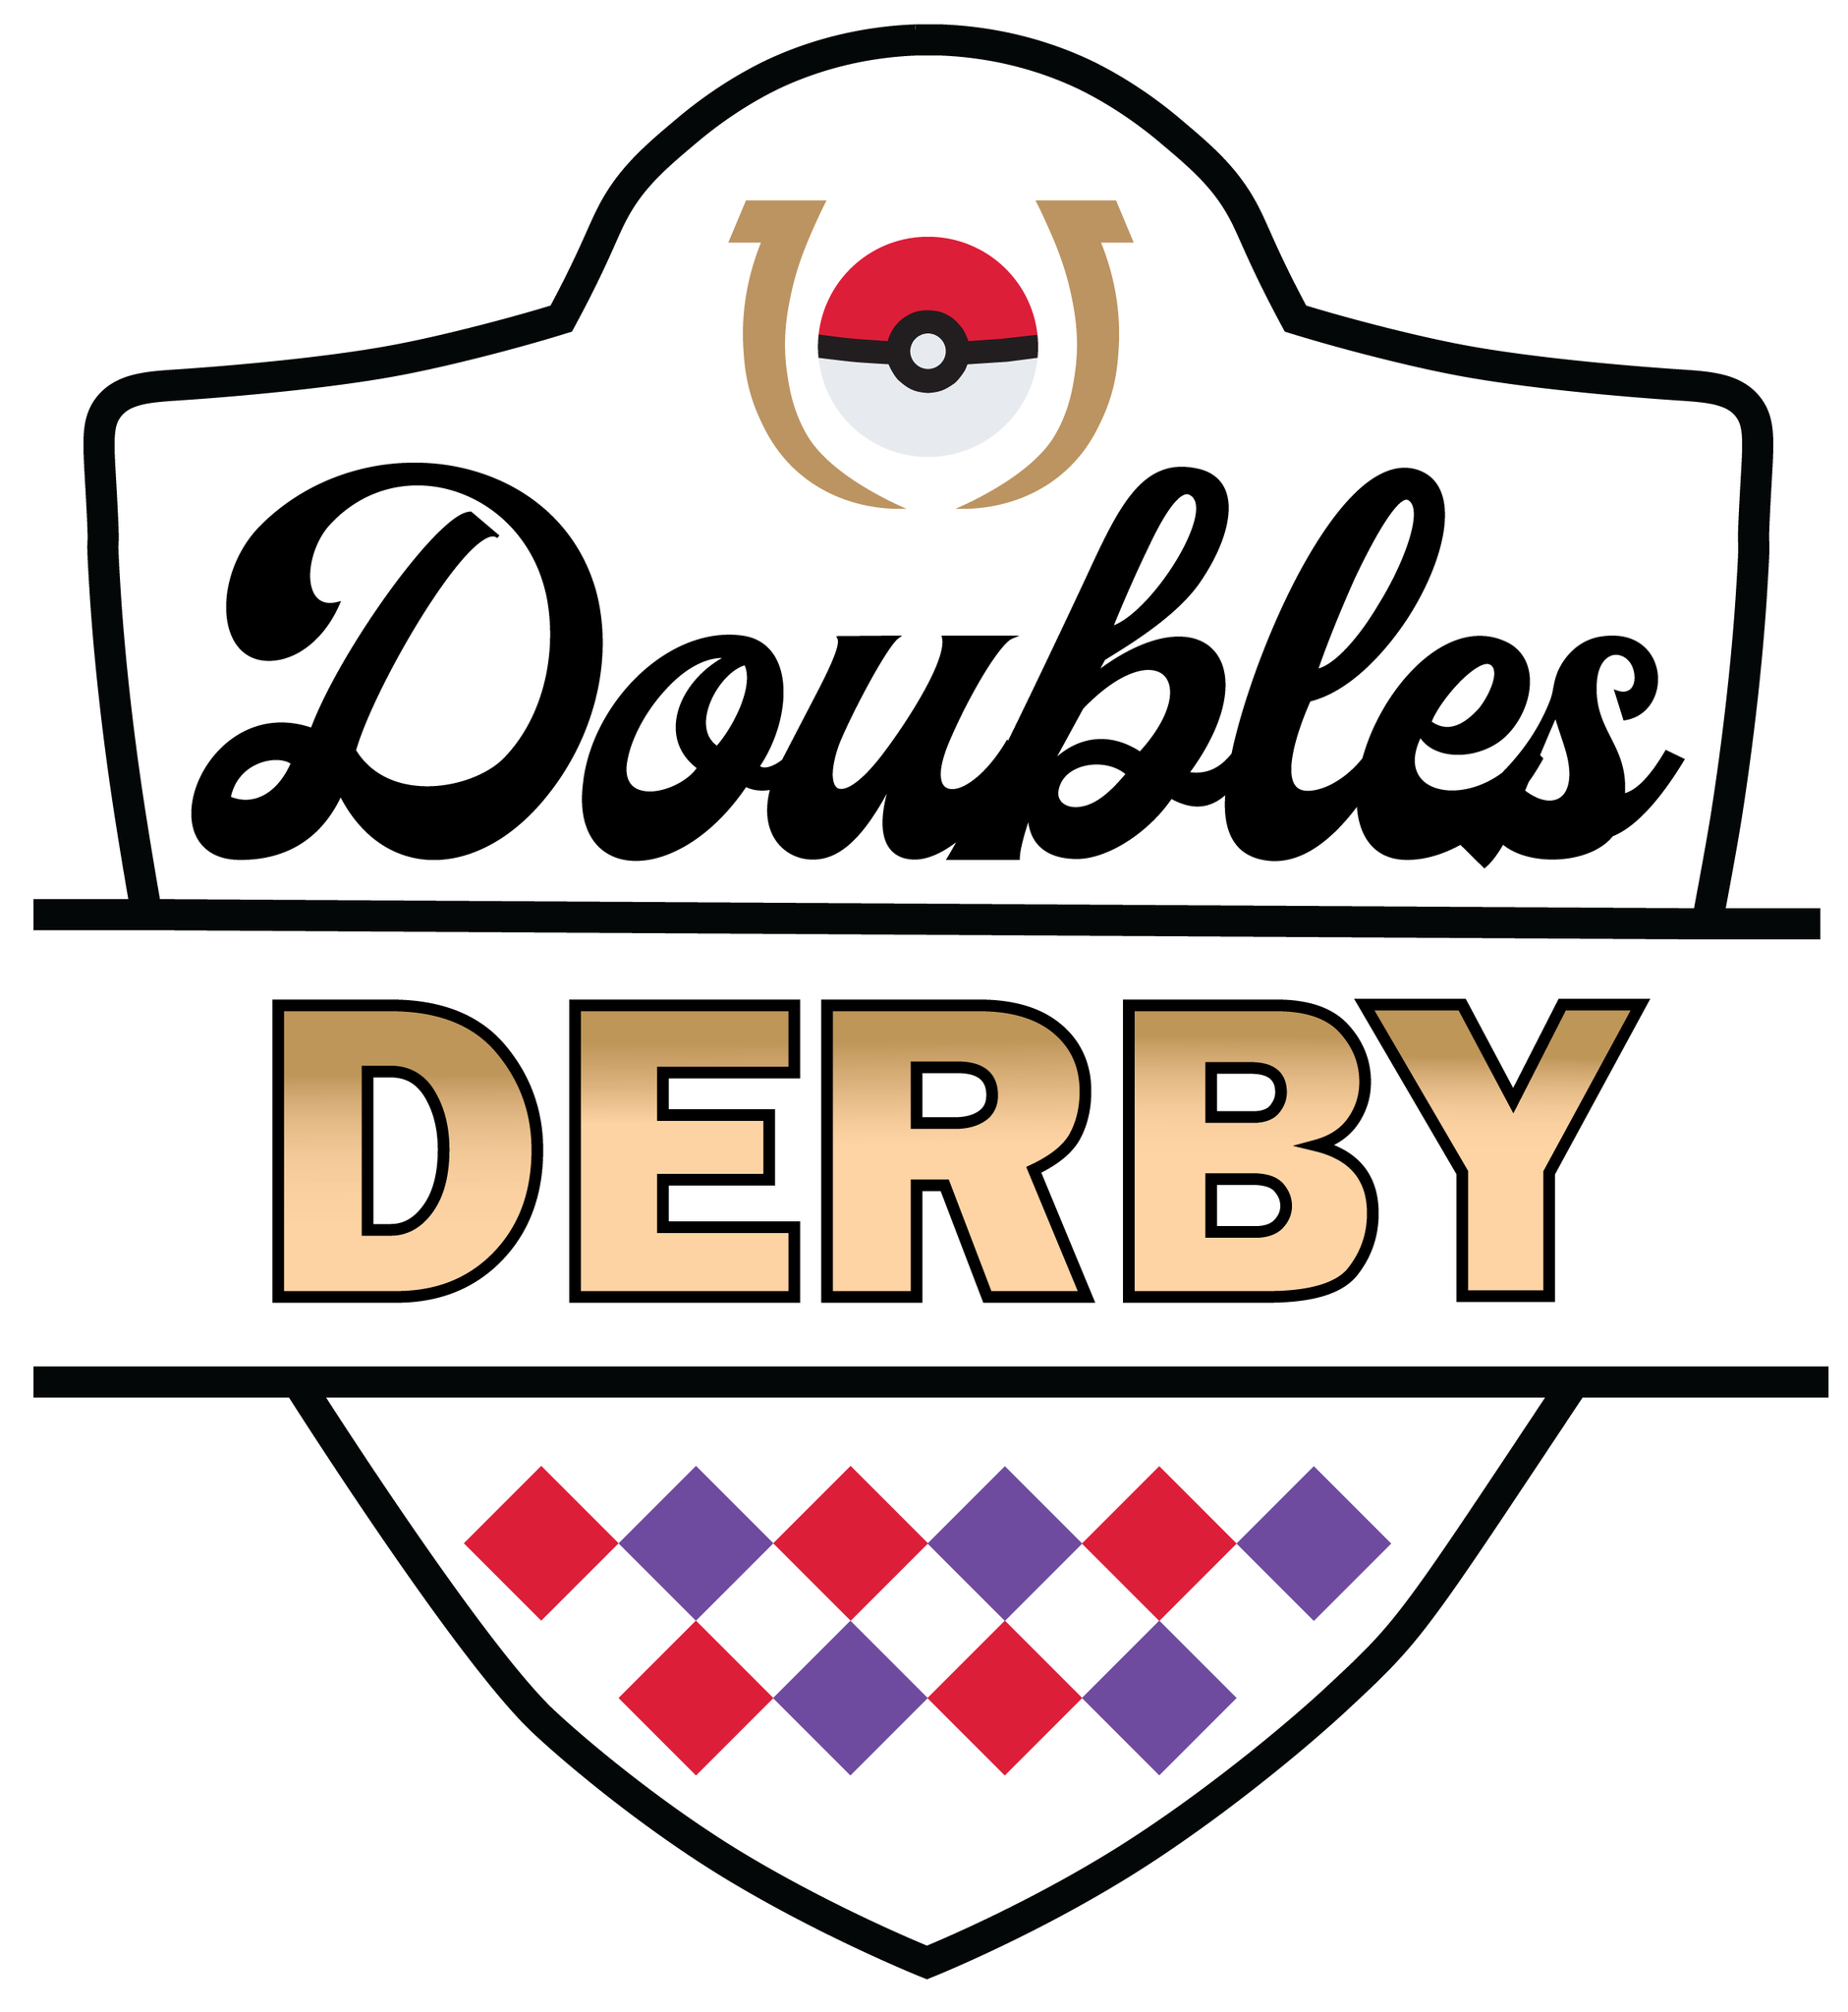 This week we are featuring a Doubles - Smogon University